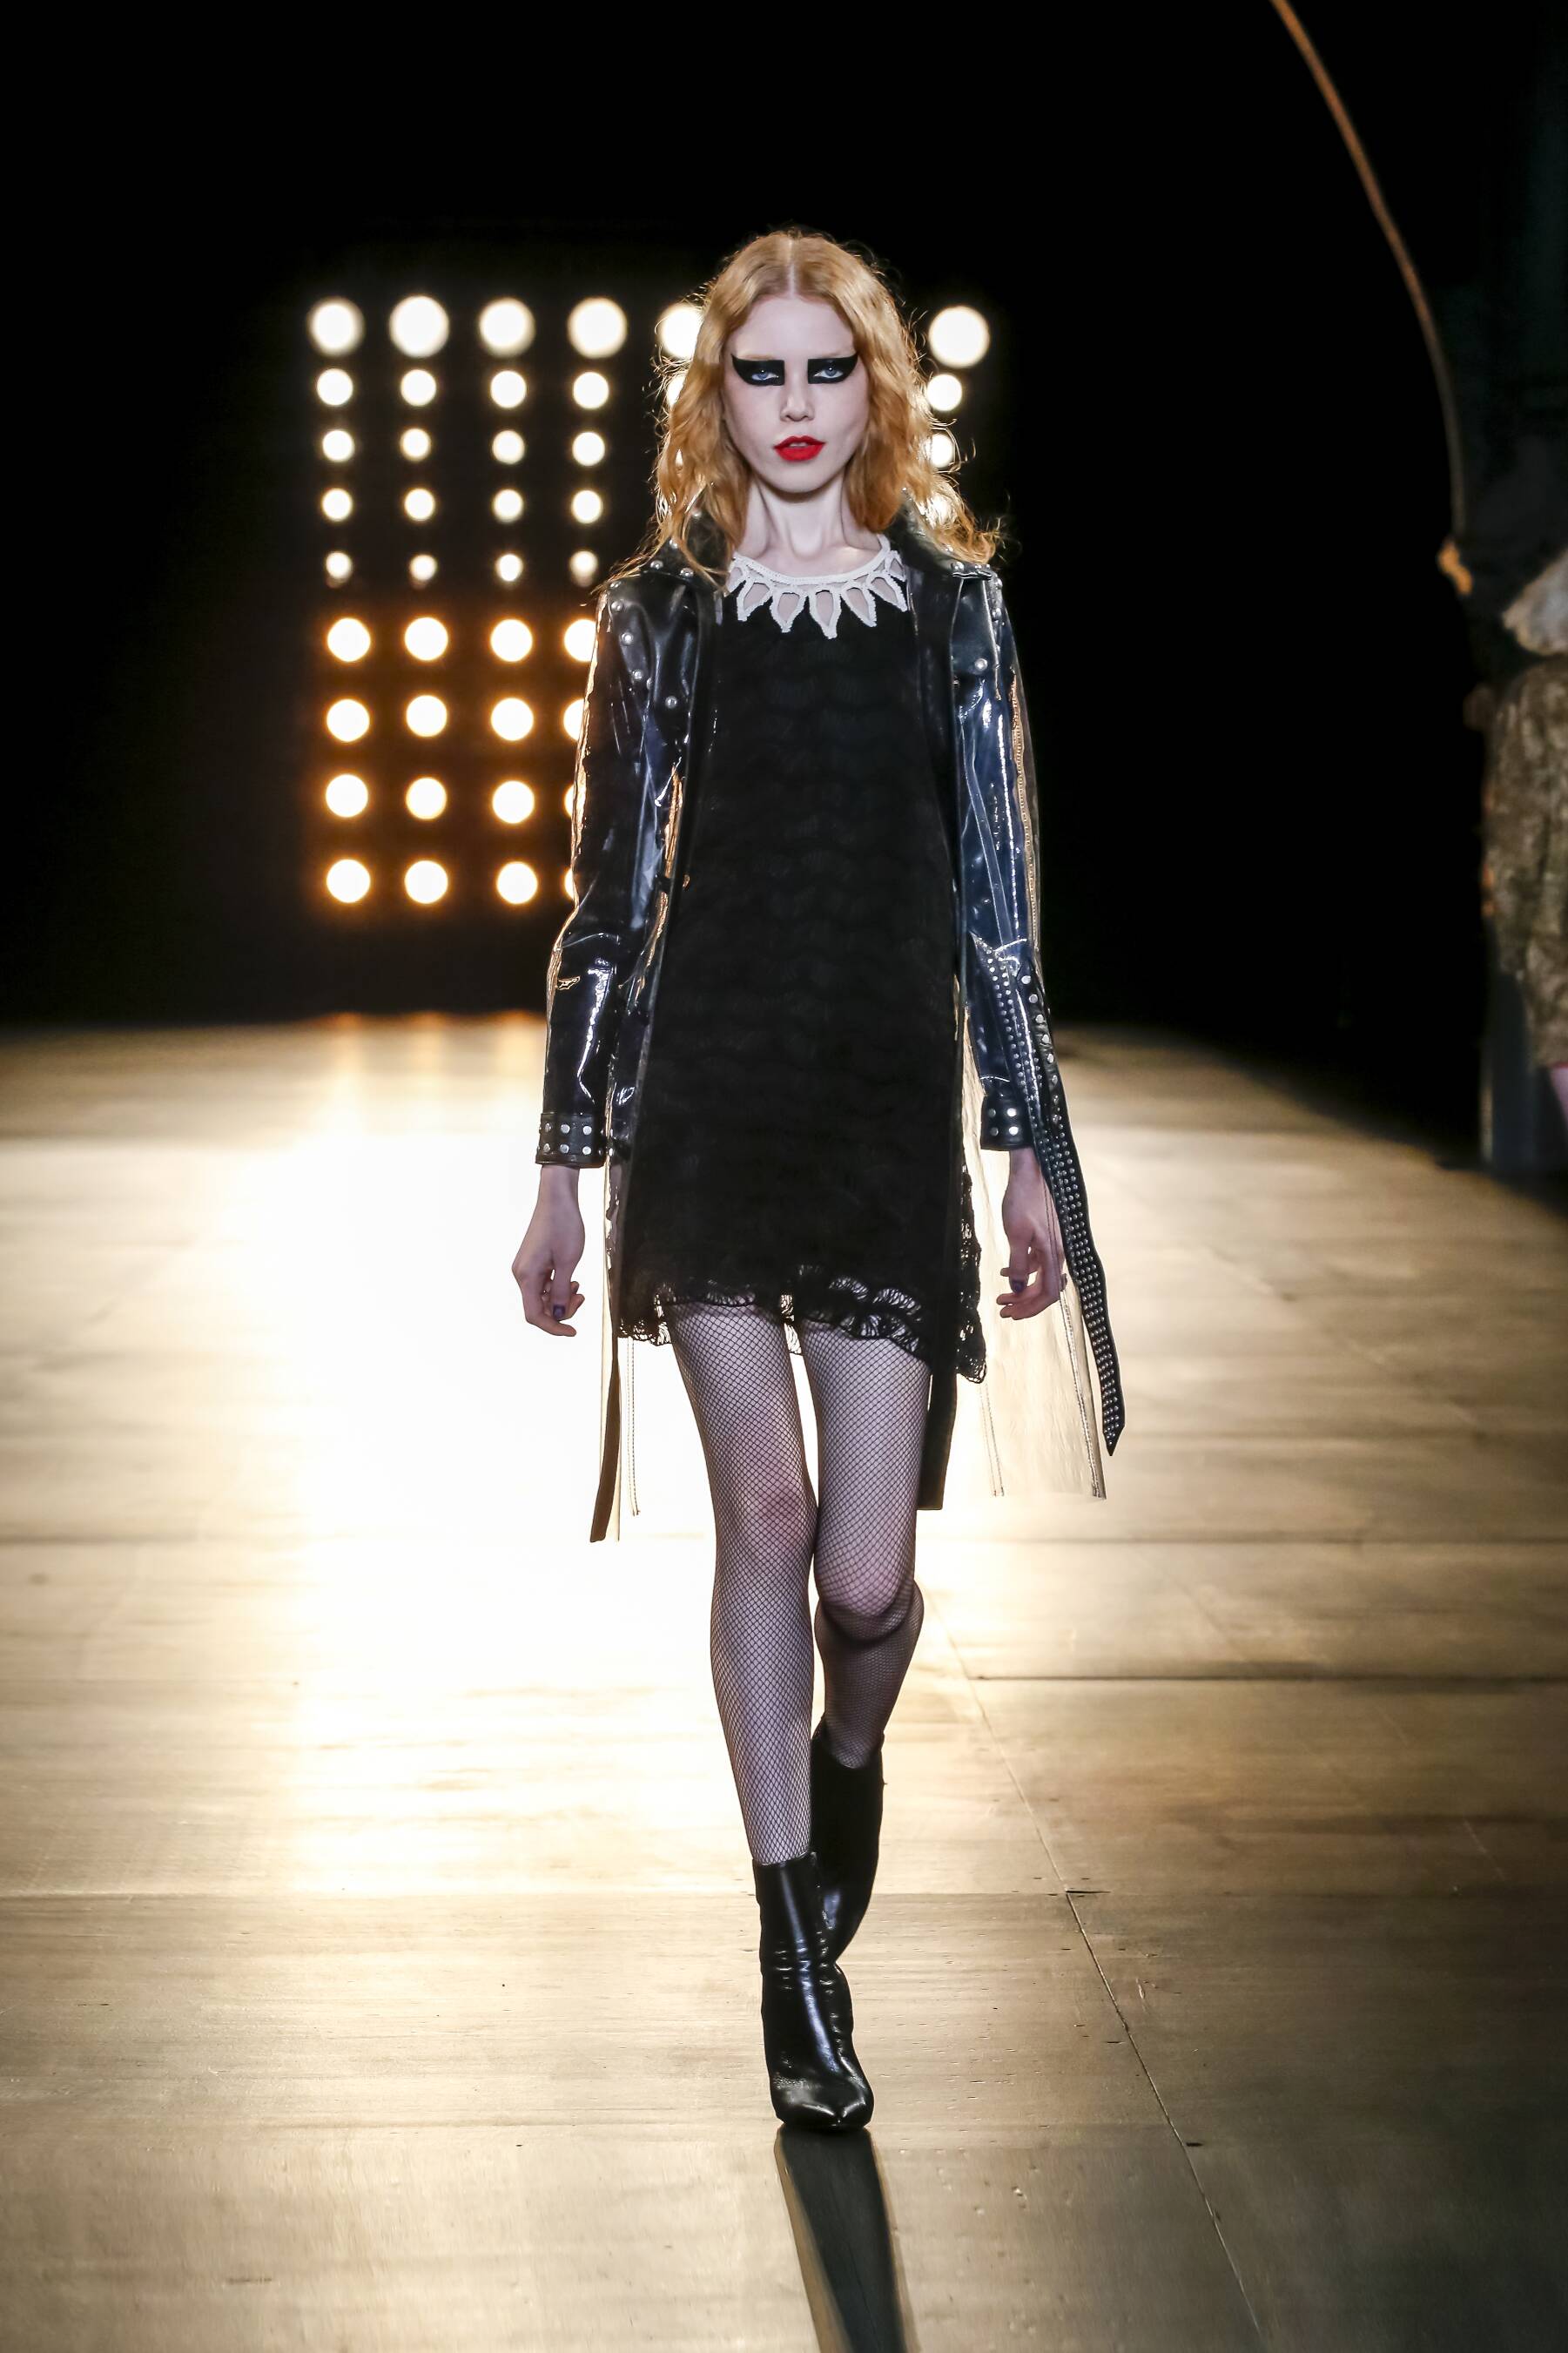 SAINT LAURENT FALL WINTER 2015-16 WOMEN’S COLLECTION | The Skinny Beep